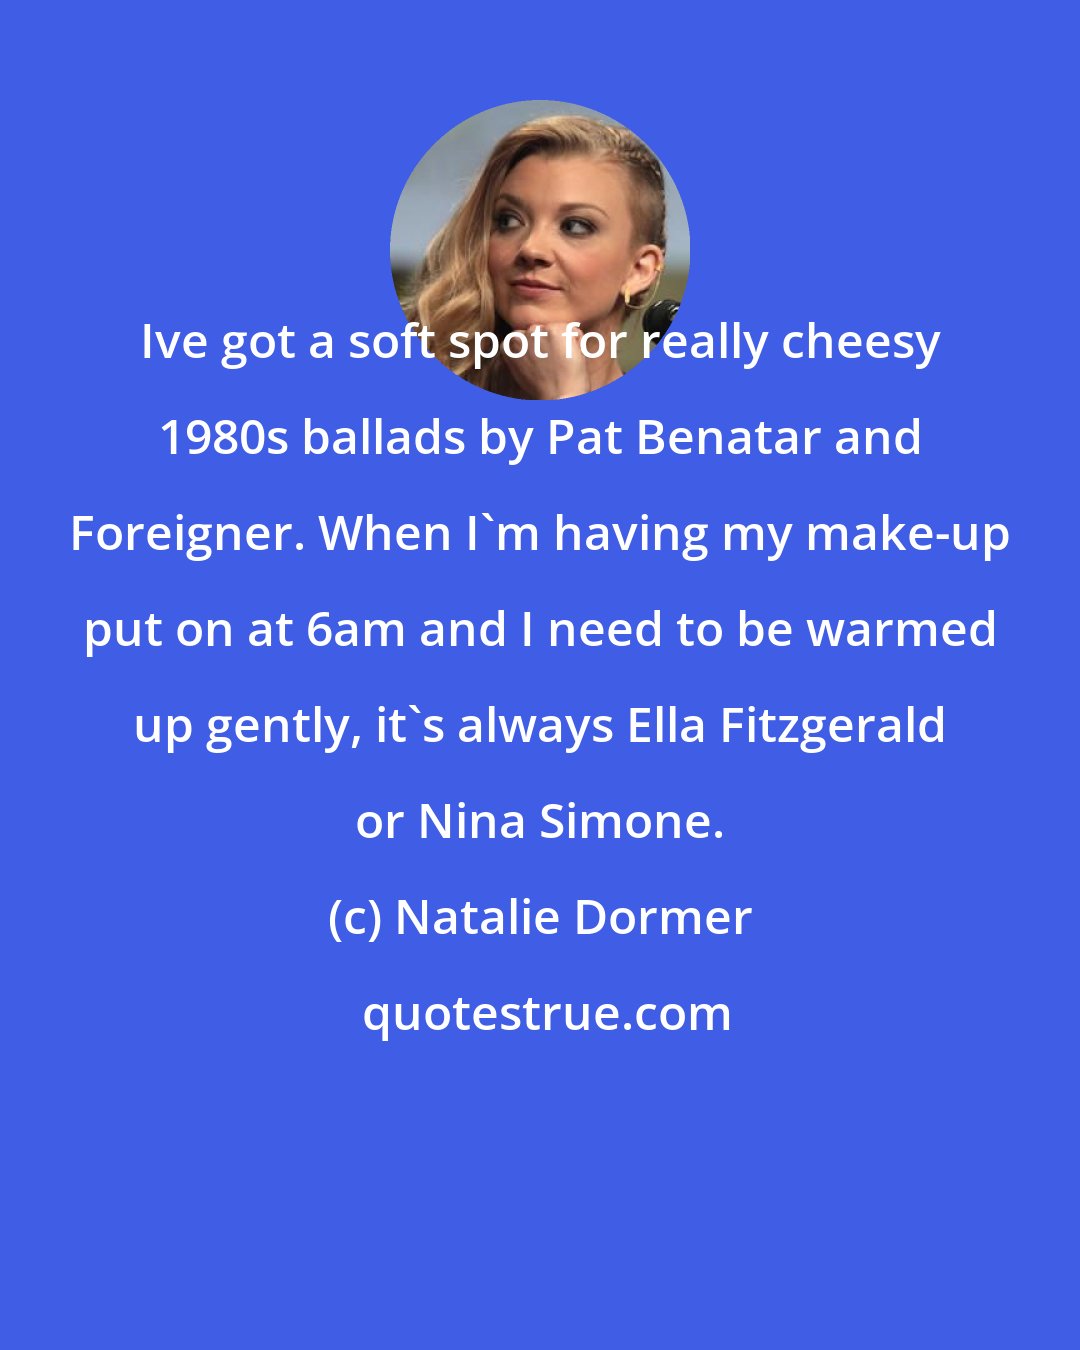 Natalie Dormer: Ive got a soft spot for really cheesy 1980s ballads by Pat Benatar and Foreigner. When I'm having my make-up put on at 6am and I need to be warmed up gently, it's always Ella Fitzgerald or Nina Simone.